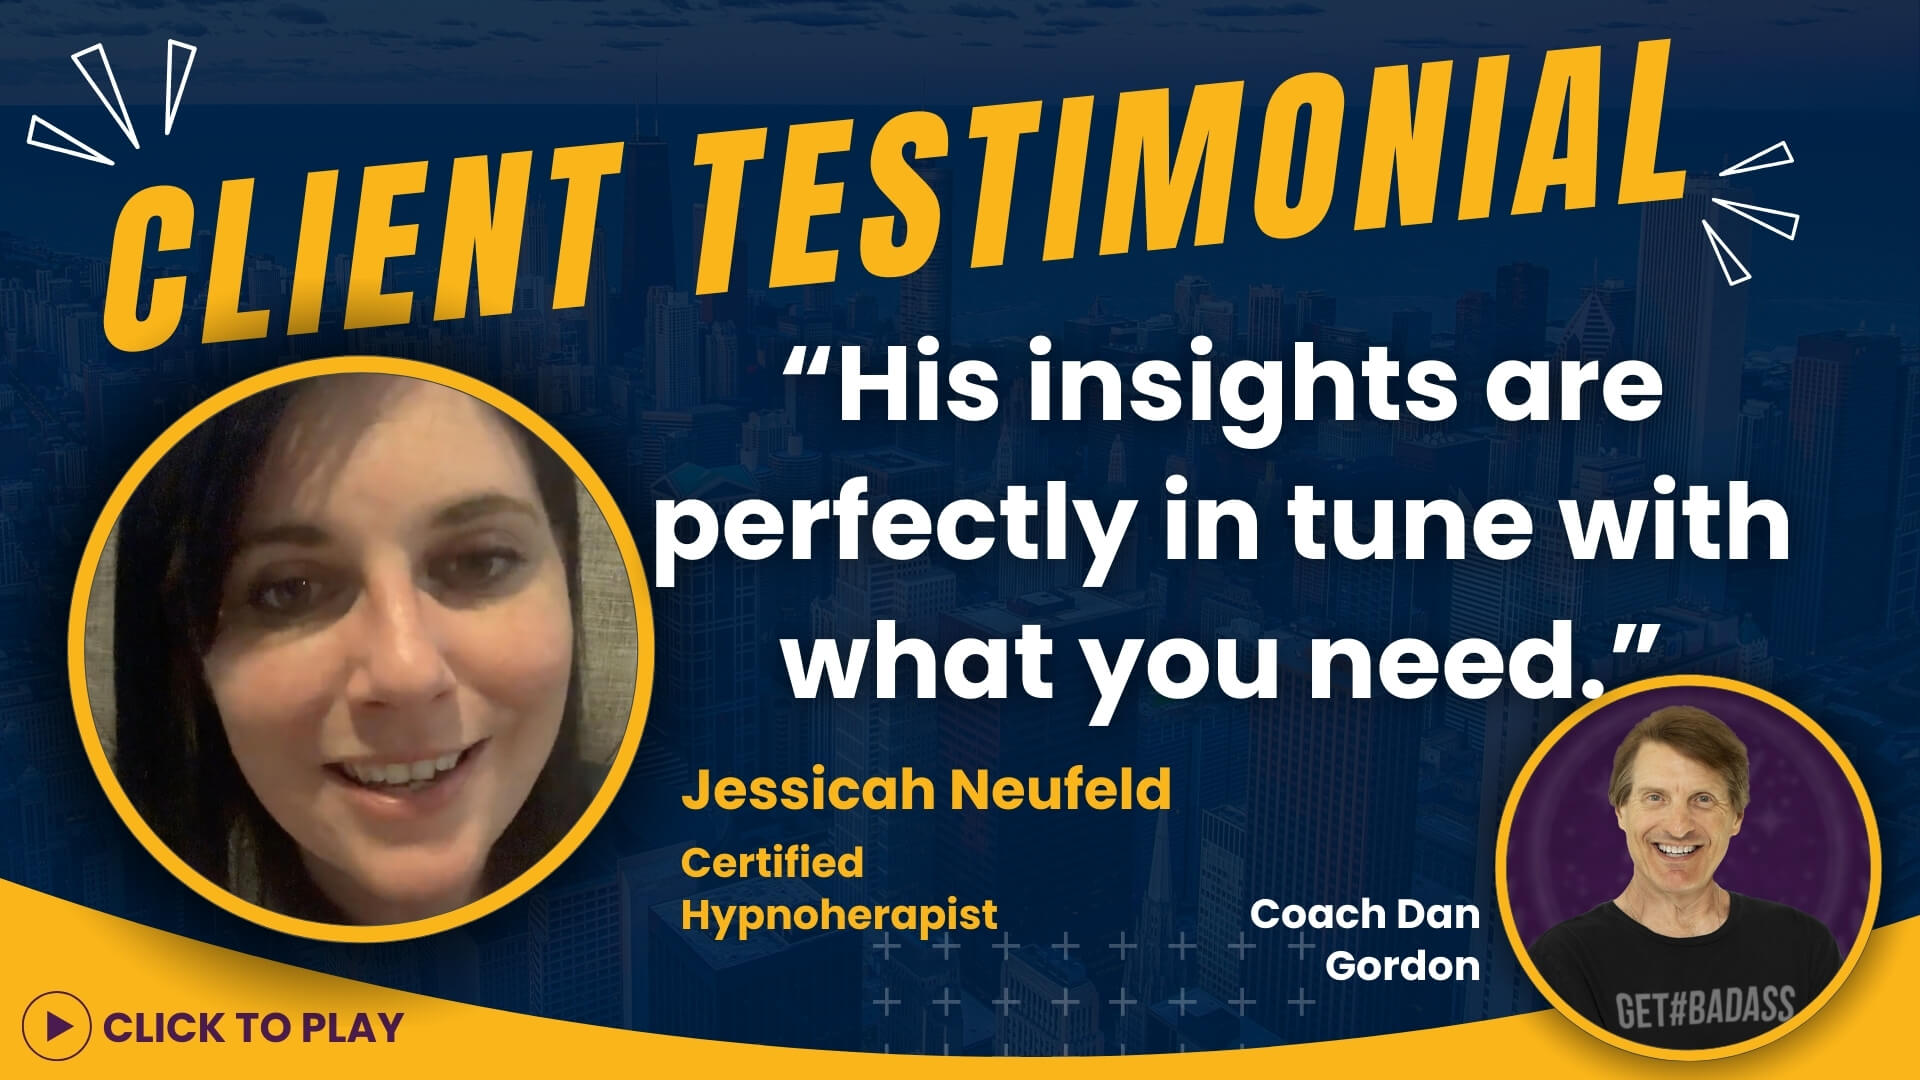 Jessicah Neufeld, certified hypnotherapist, provides a video testimonial expressing how Coach Dan's insights were exactly what she needed.